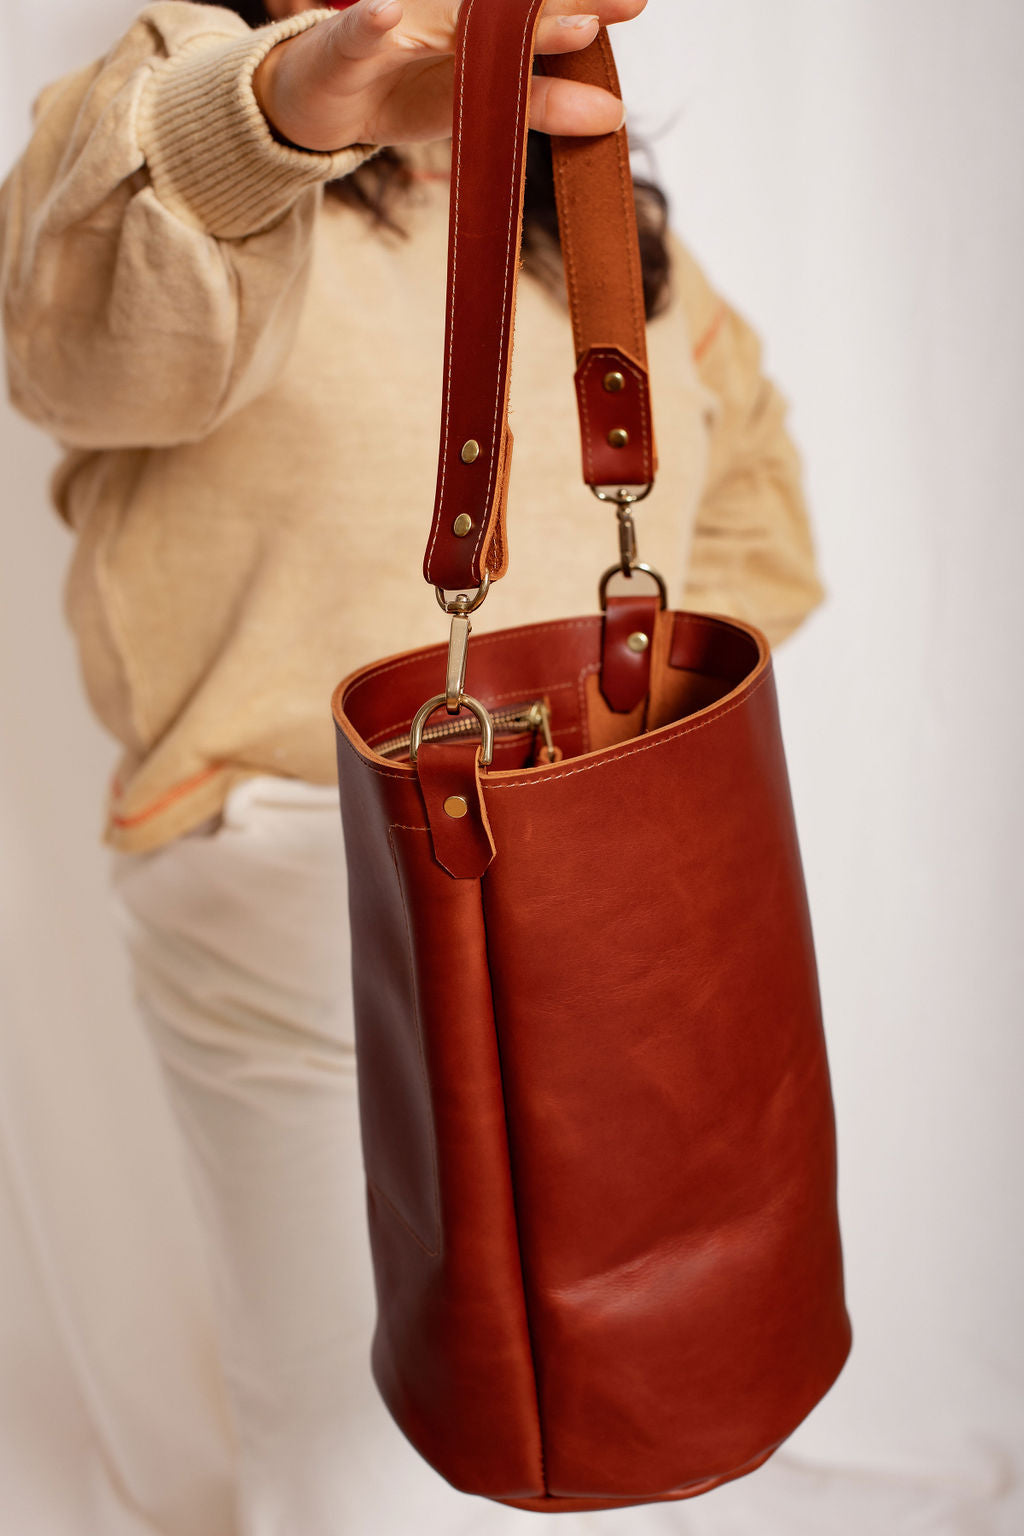 FRANCES BUCKET BAG | CHESTNUT Leather Bag - handcrafted by Market Canvas Leather in Tofino, BC, Canada